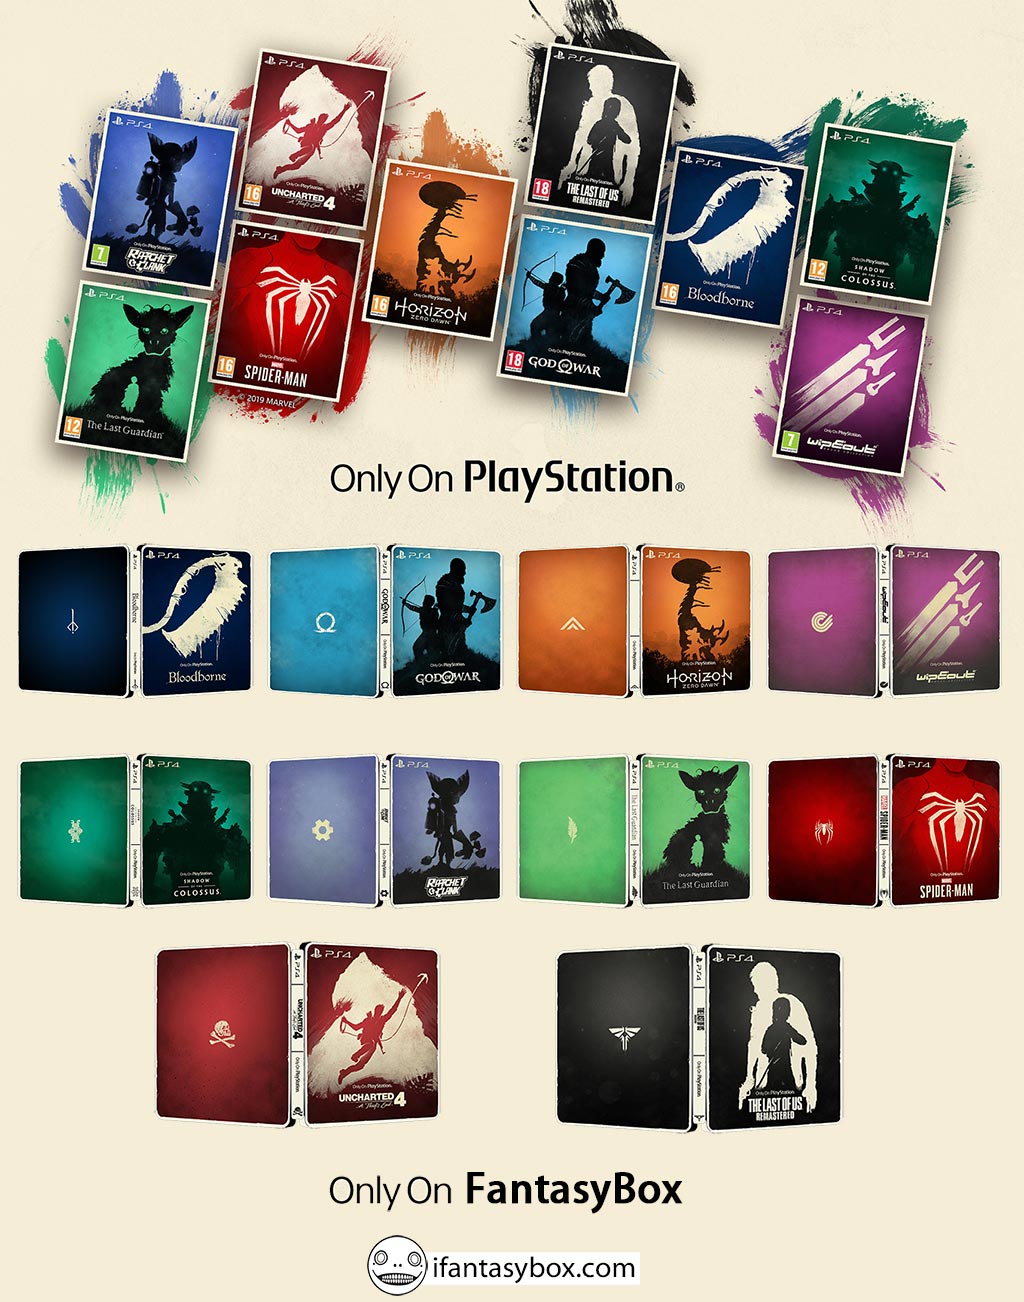 playstation only on playstation bundle